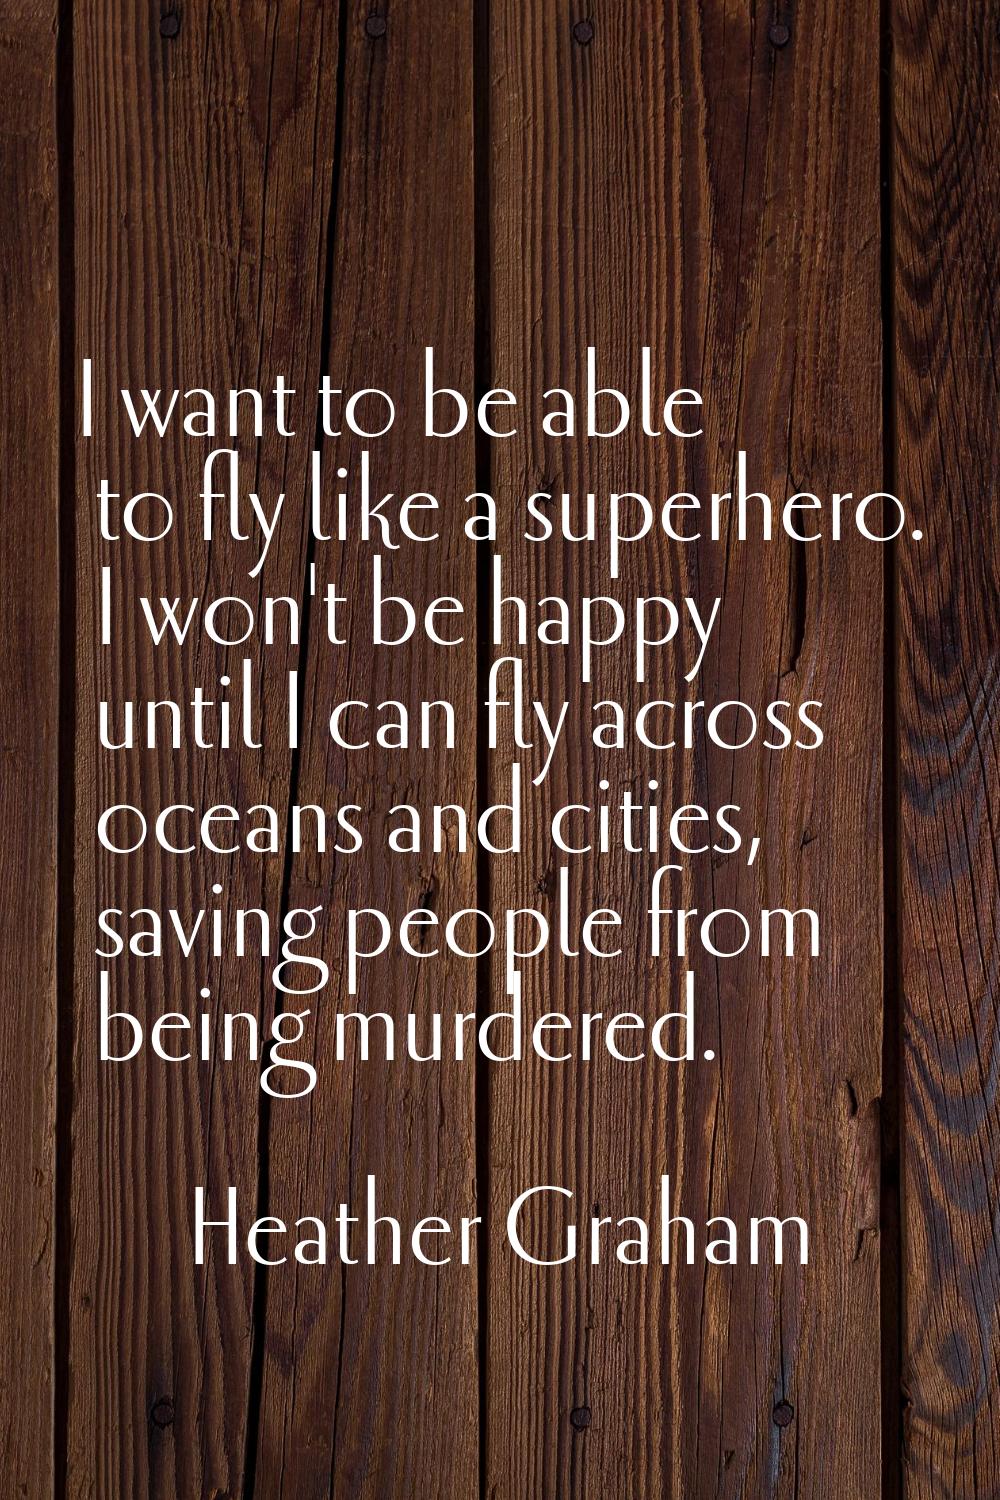 I want to be able to fly like a superhero. I won't be happy until I can fly across oceans and citie